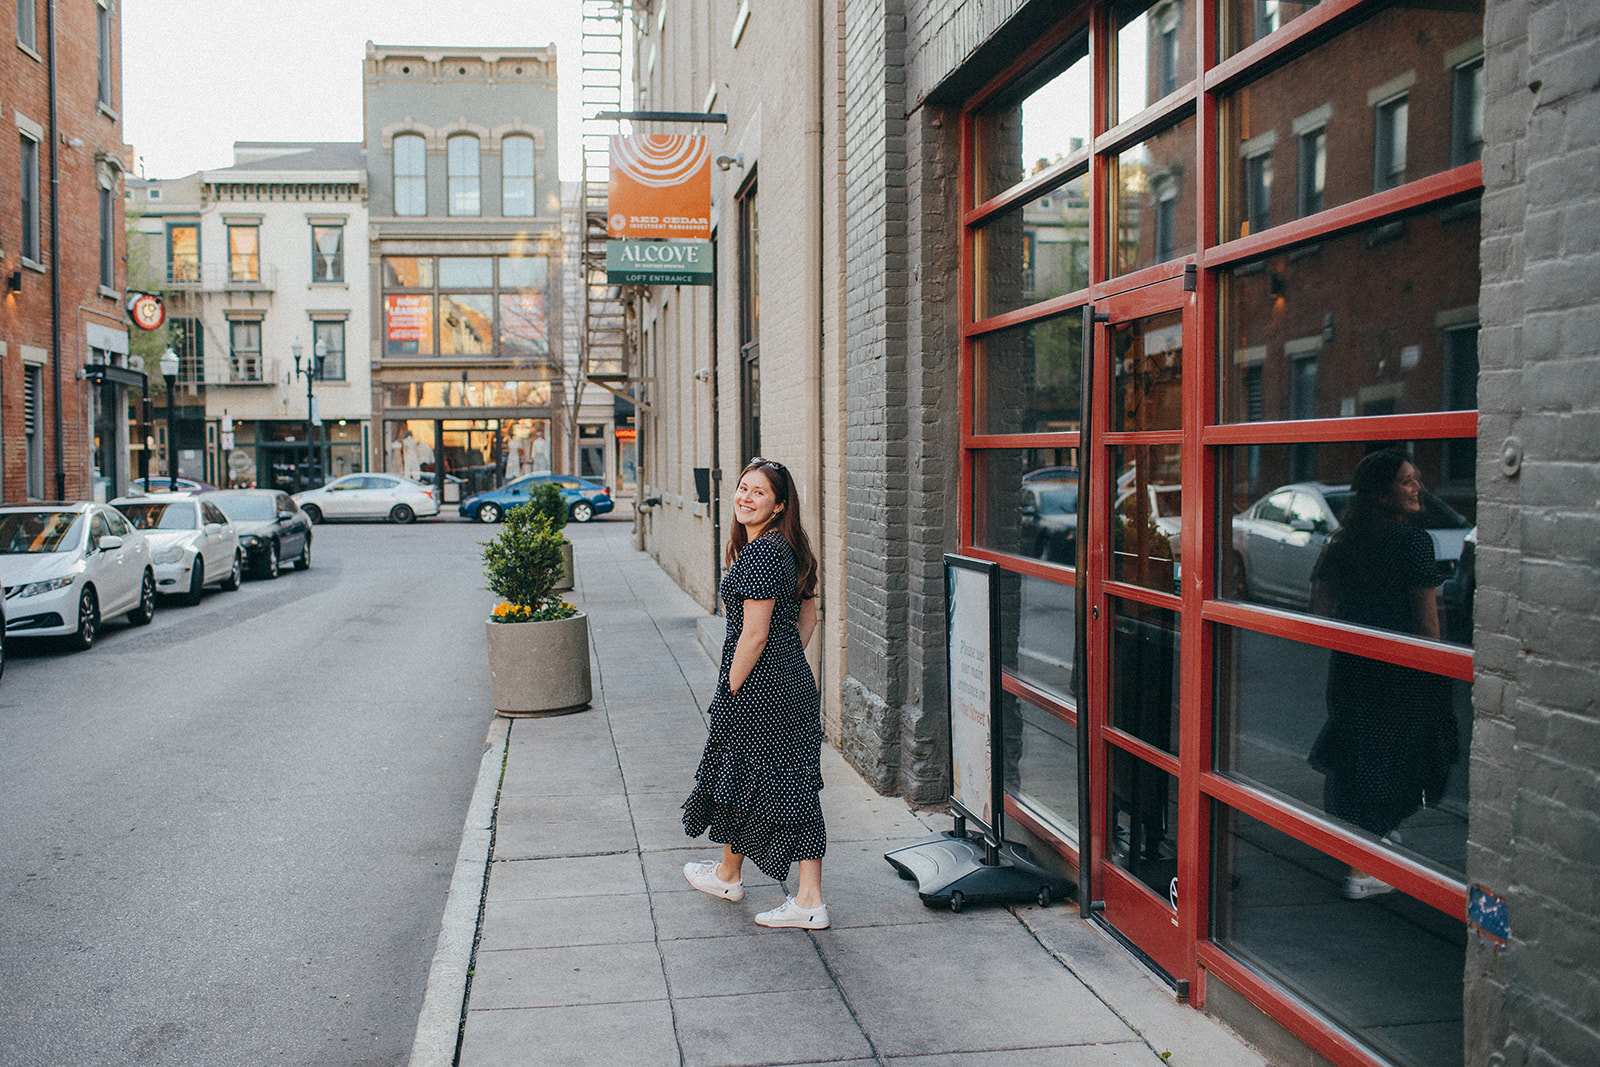 A bride-to-be walking down the streets of Cincinnati's Over the Rhine